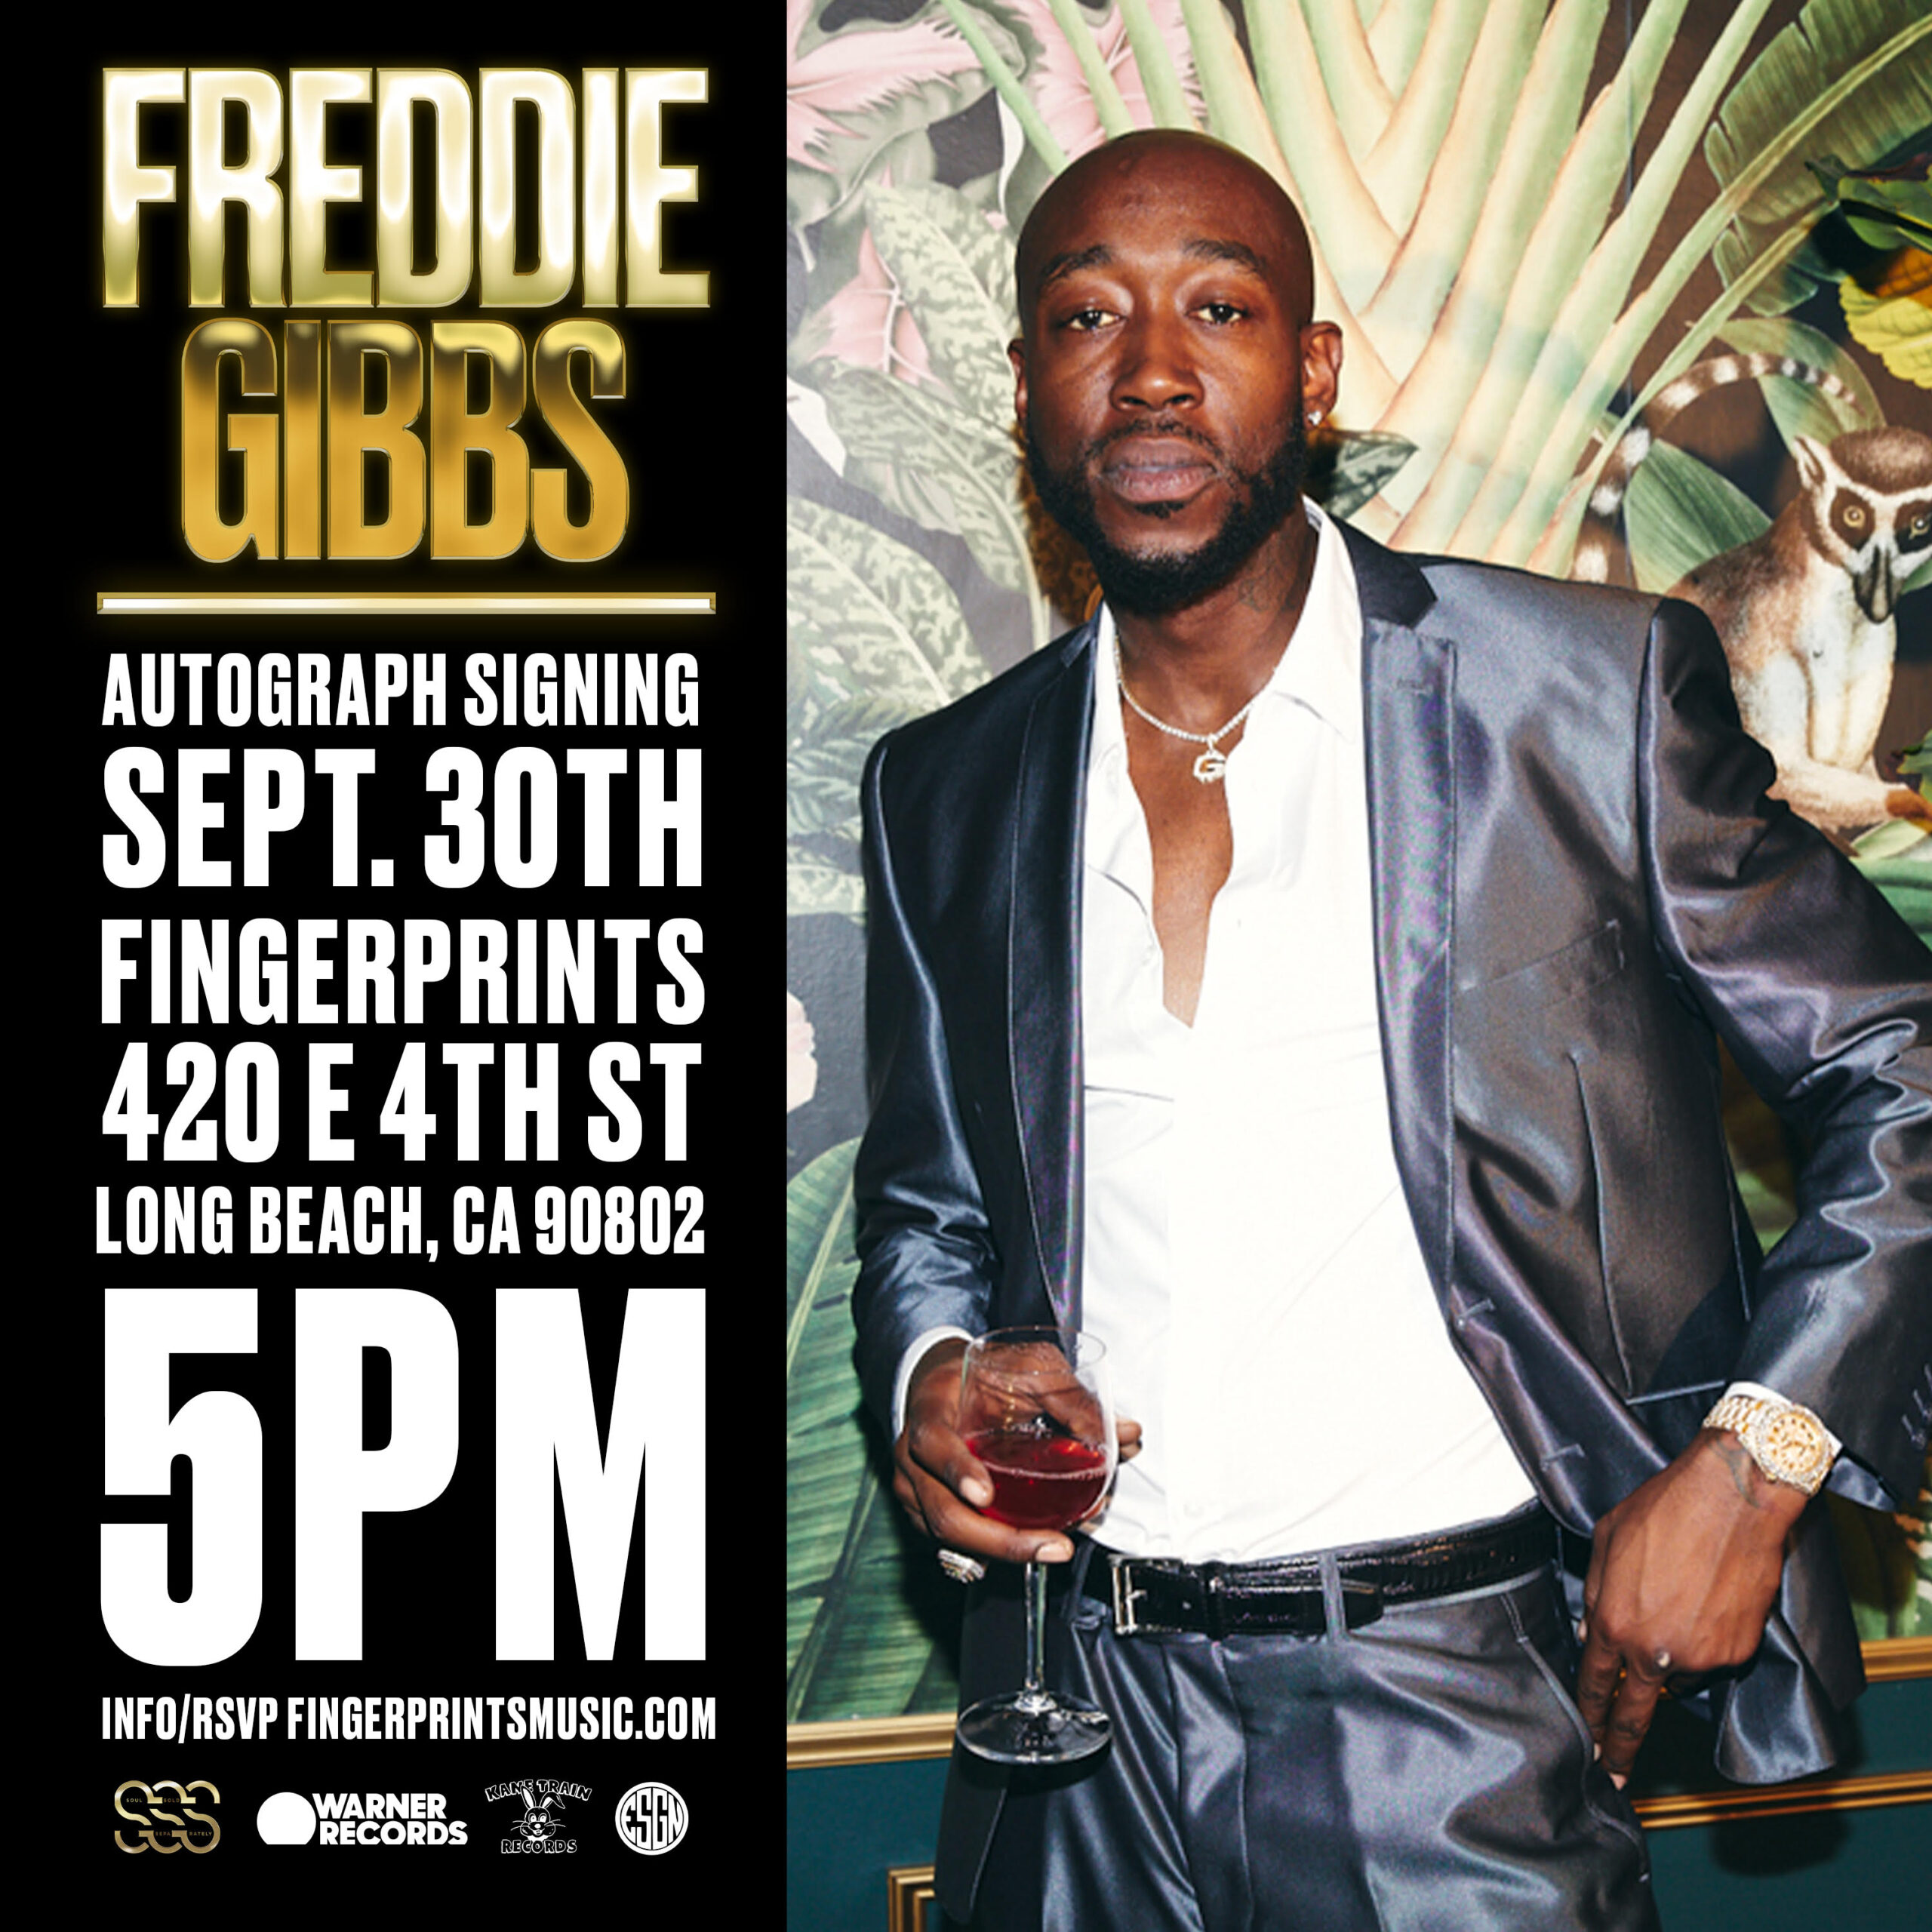 Freddie Gibbs Will Be At Fingerprints On Release Day At 5pm To Sign Copies Of Oul Old Eparately For Fans Fingerprints Music